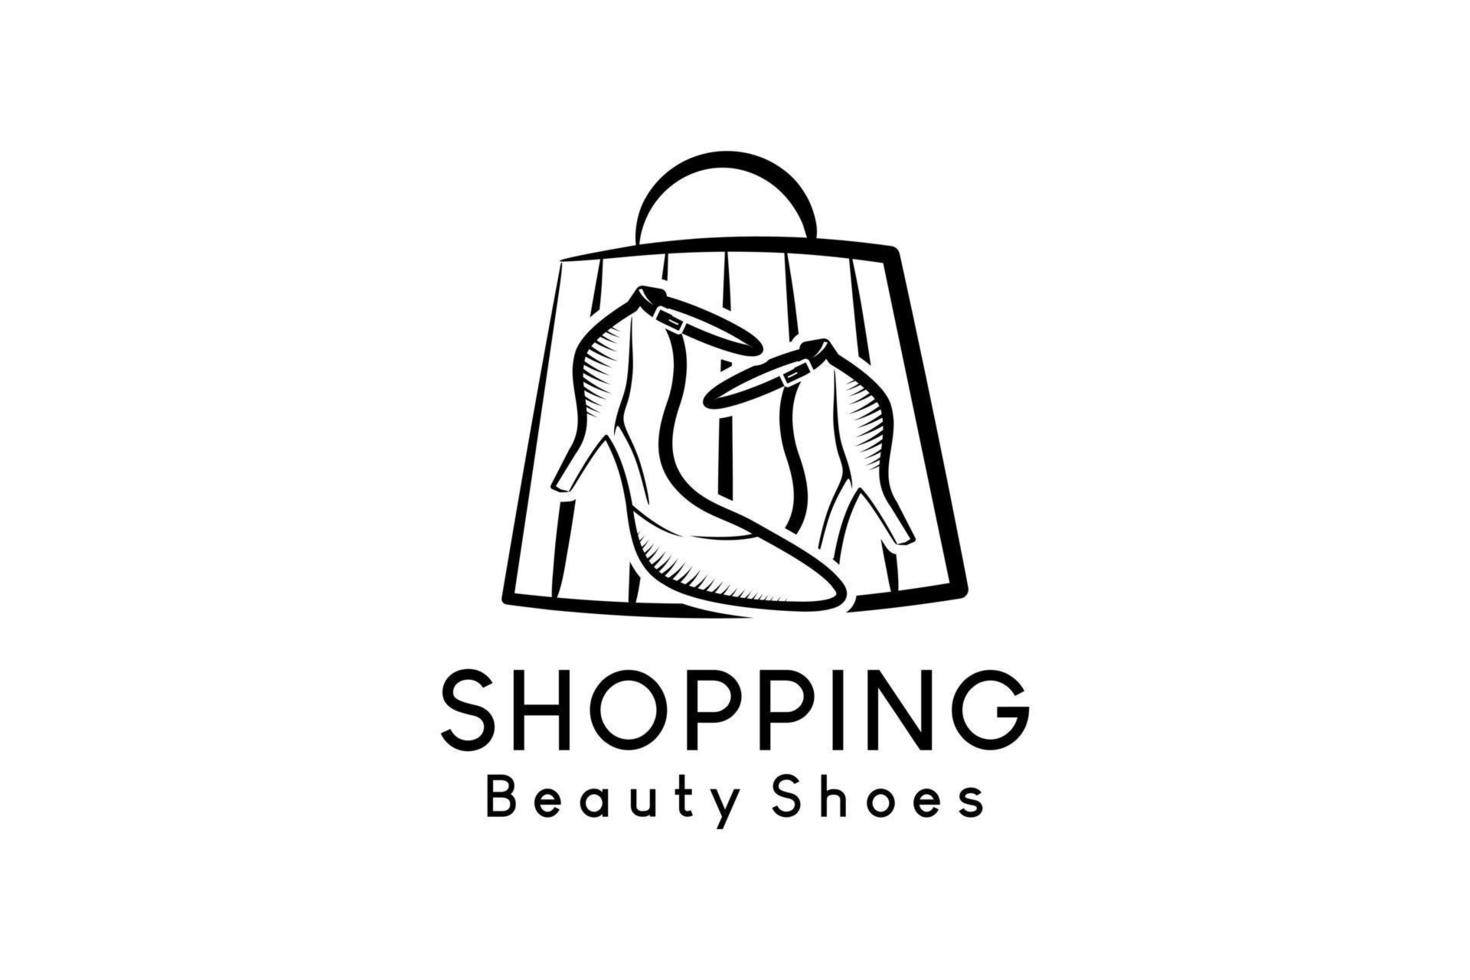 Shopping logo design with shopping bag vector illustration with women beauty shoes